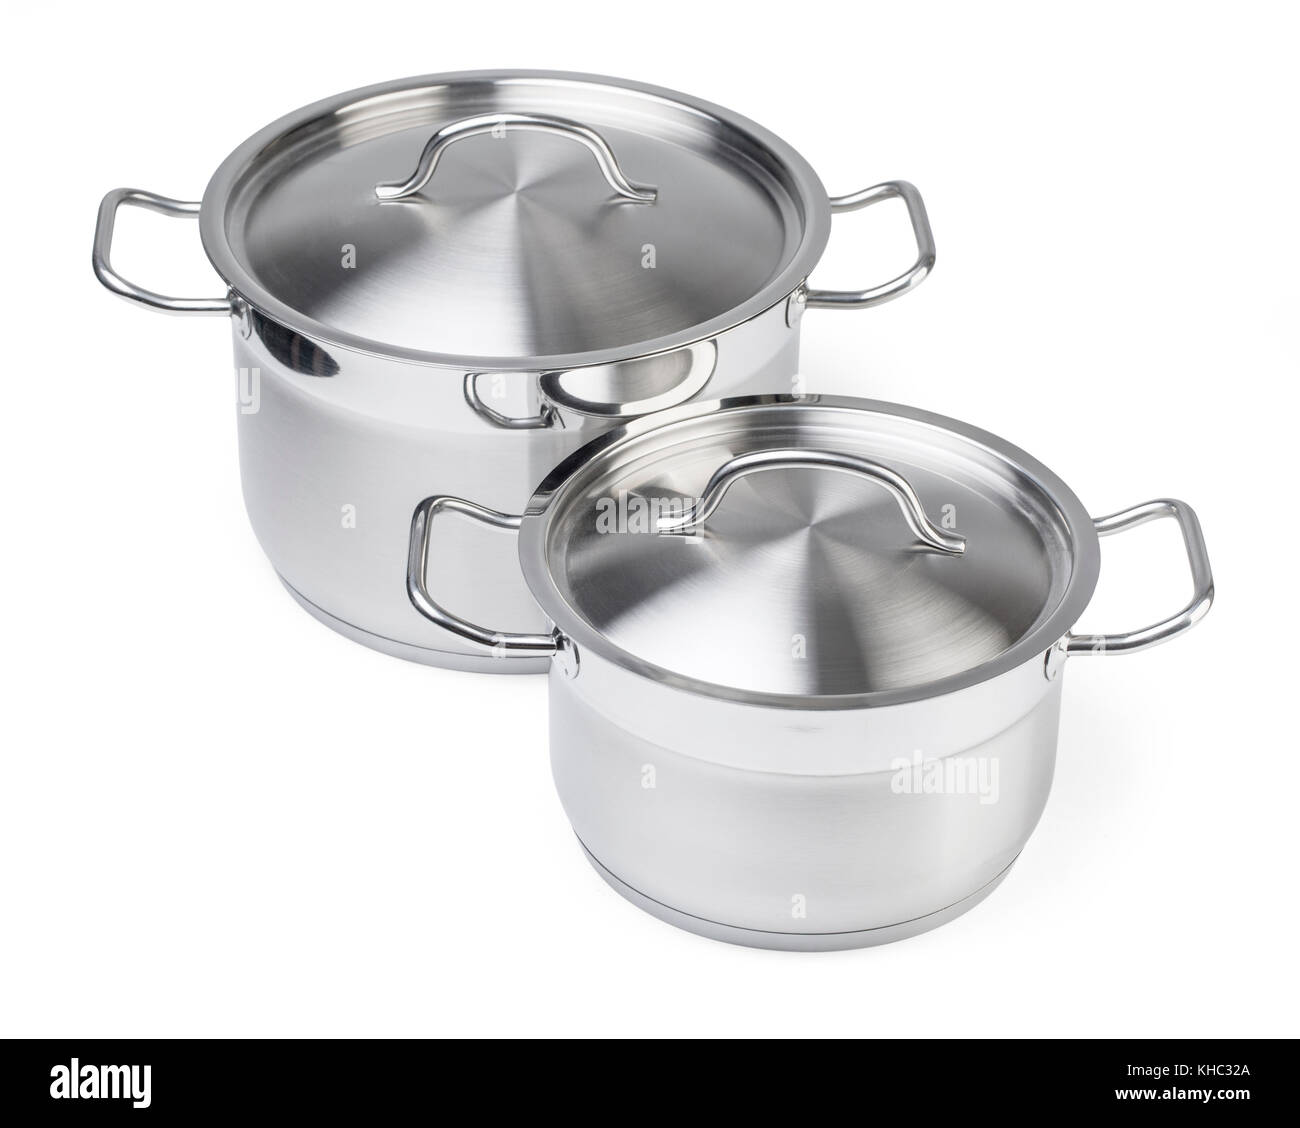 https://c8.alamy.com/comp/KHC32A/two-stainless-steel-pots-isolated-on-white-background-with-clipping-KHC32A.jpg